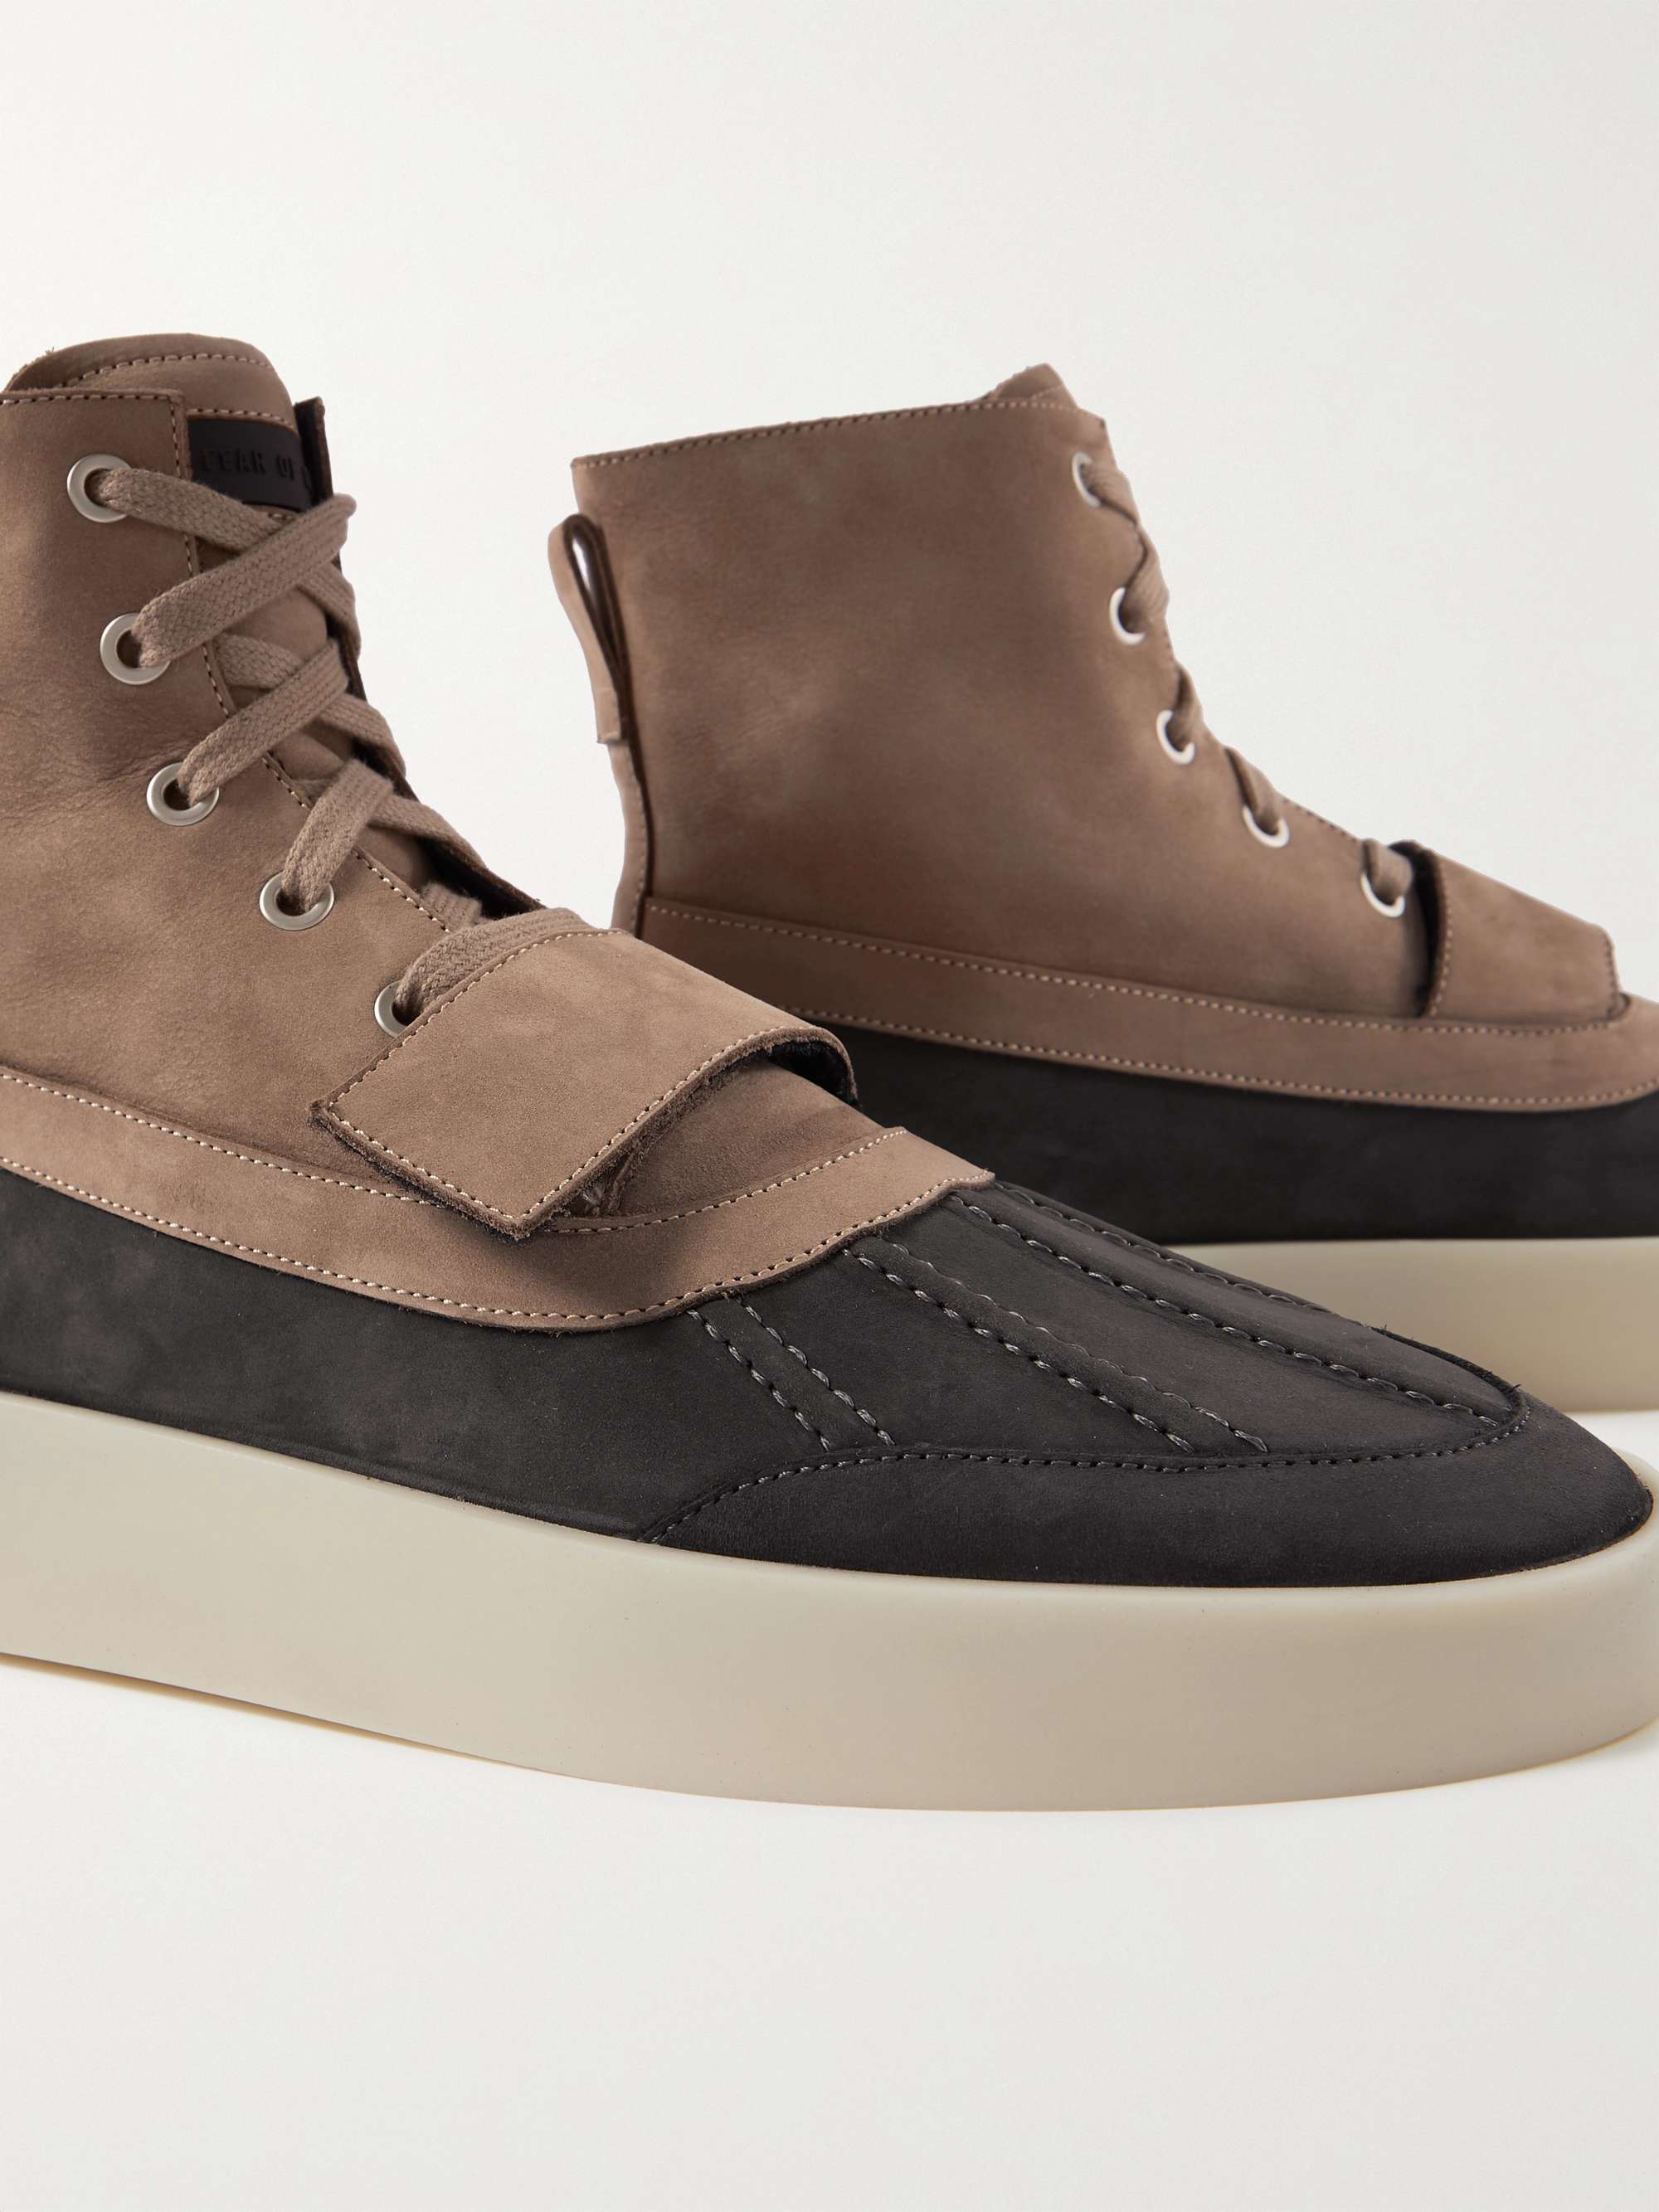 FEAR OF GOD Panelled Nubuck Duck Boots